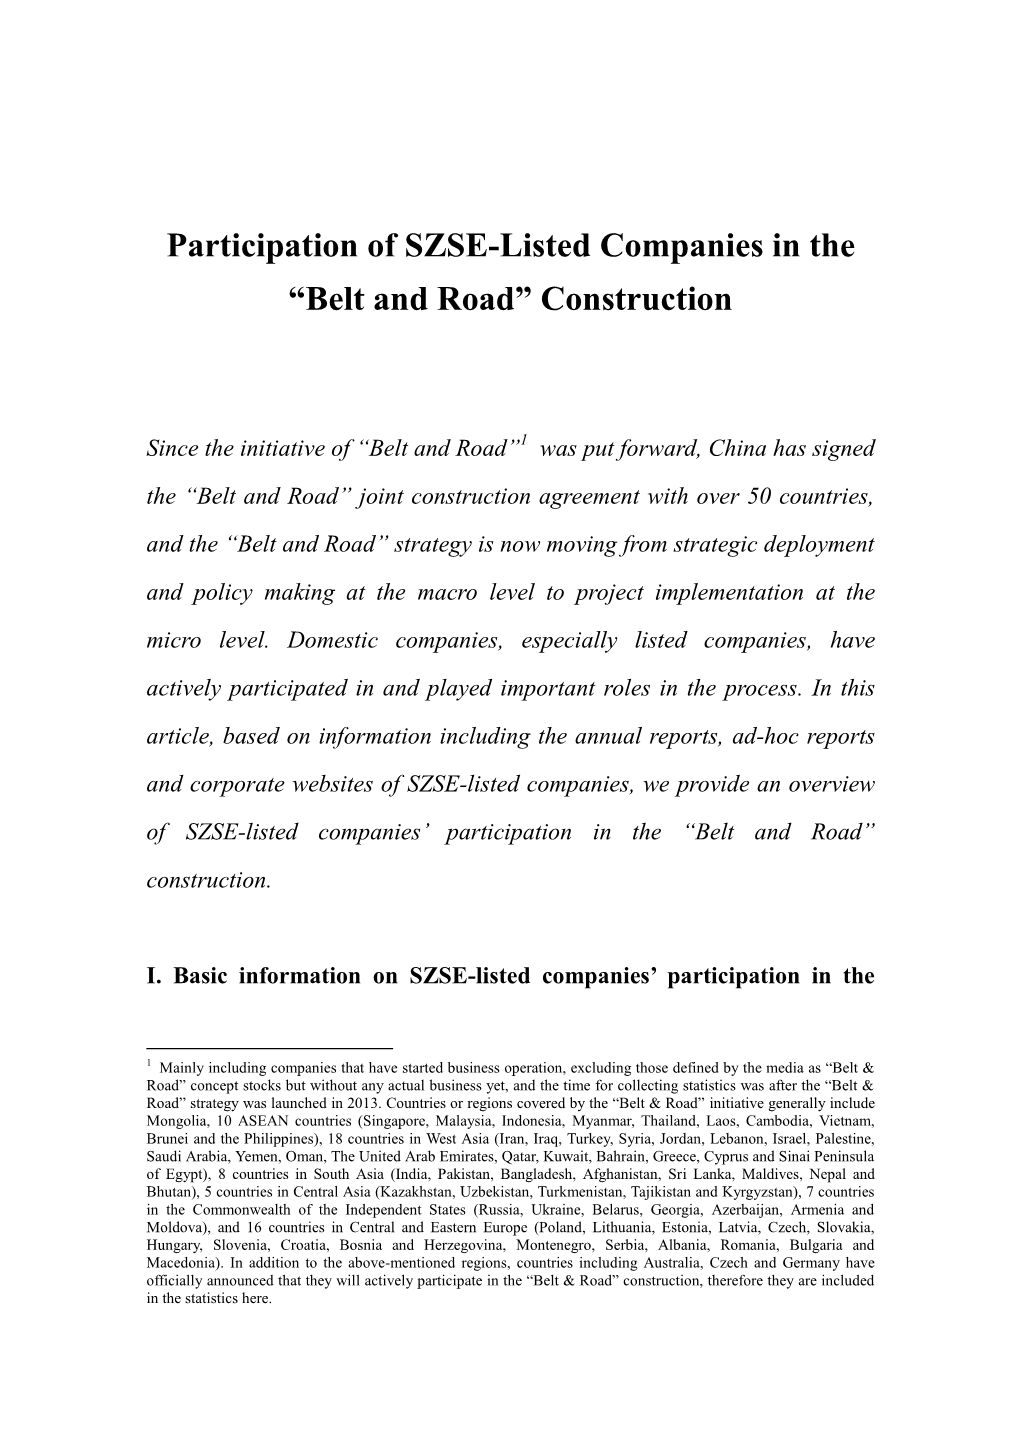 Participation of SZSE-Listed Companies in the “Belt and Road” Construction